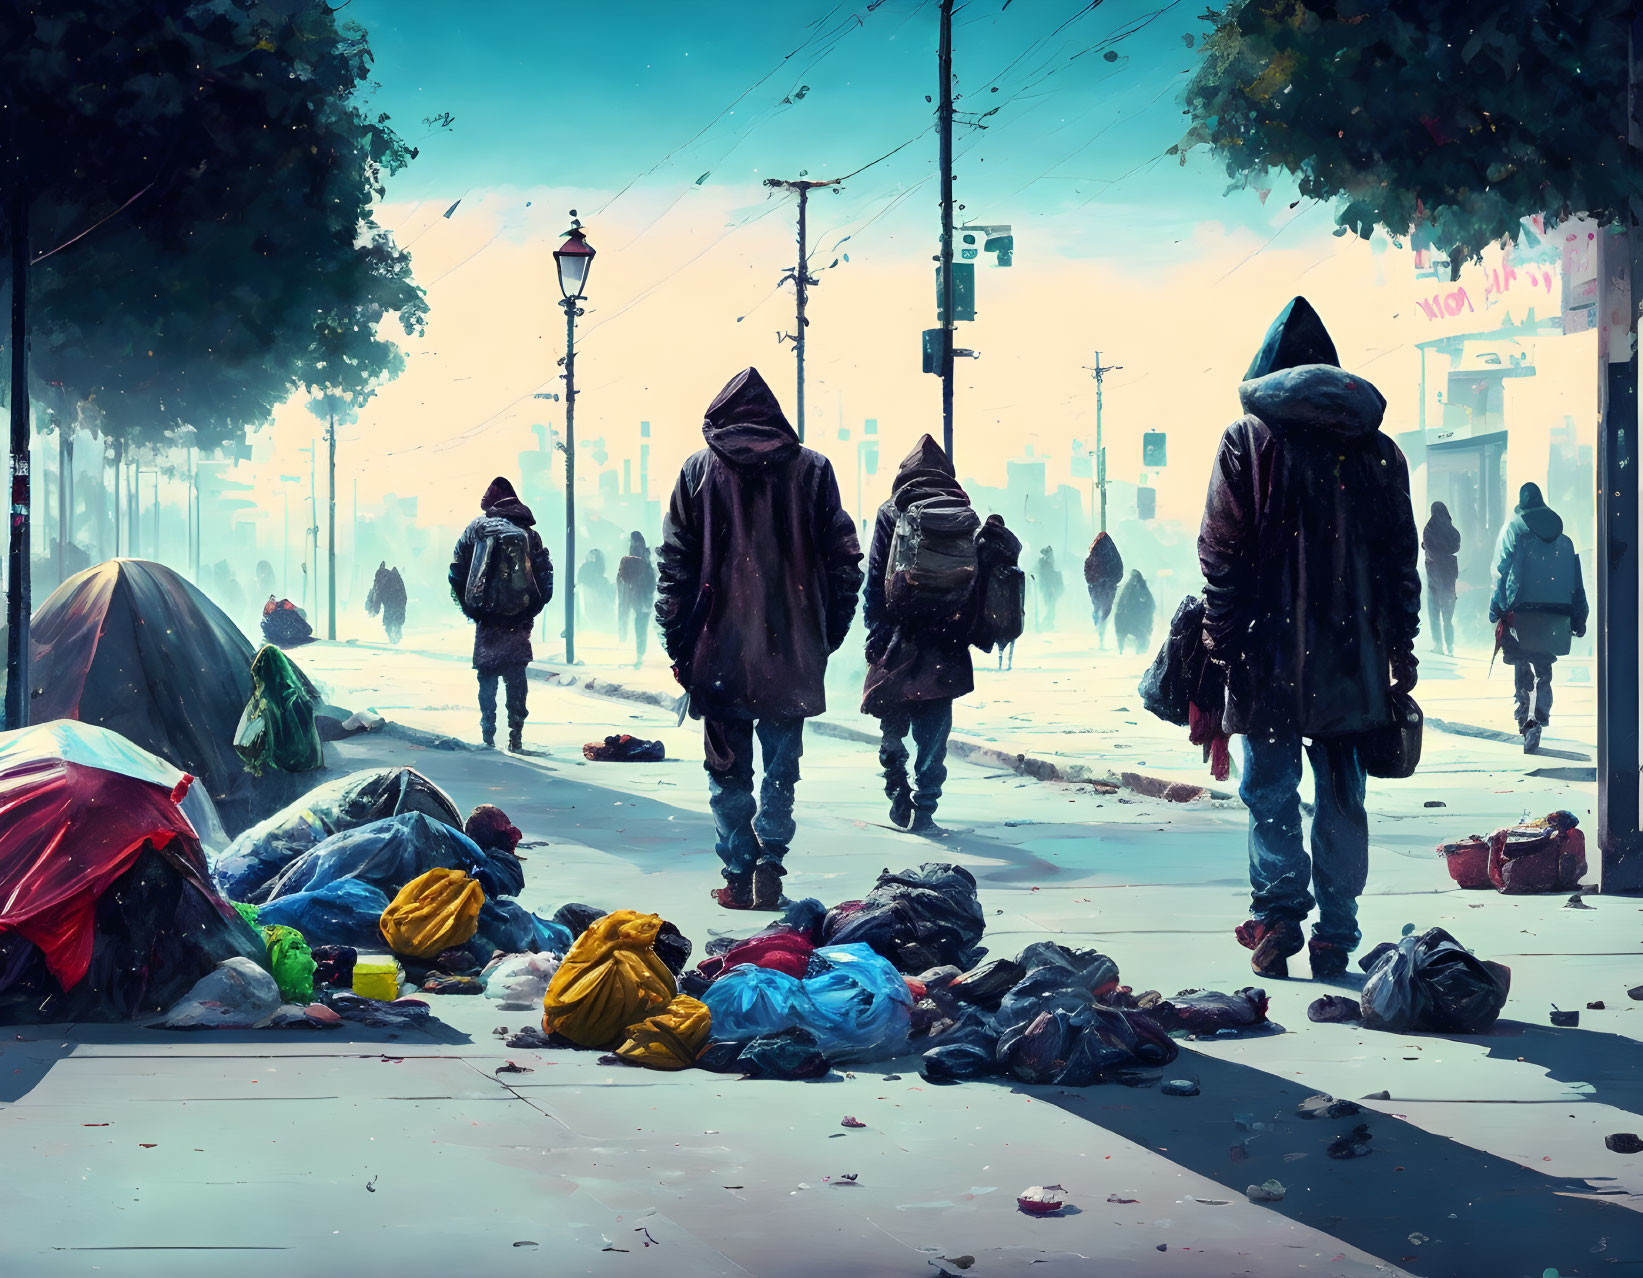 Dystopian street scene with hooded figures, litter, and makeshift shelters